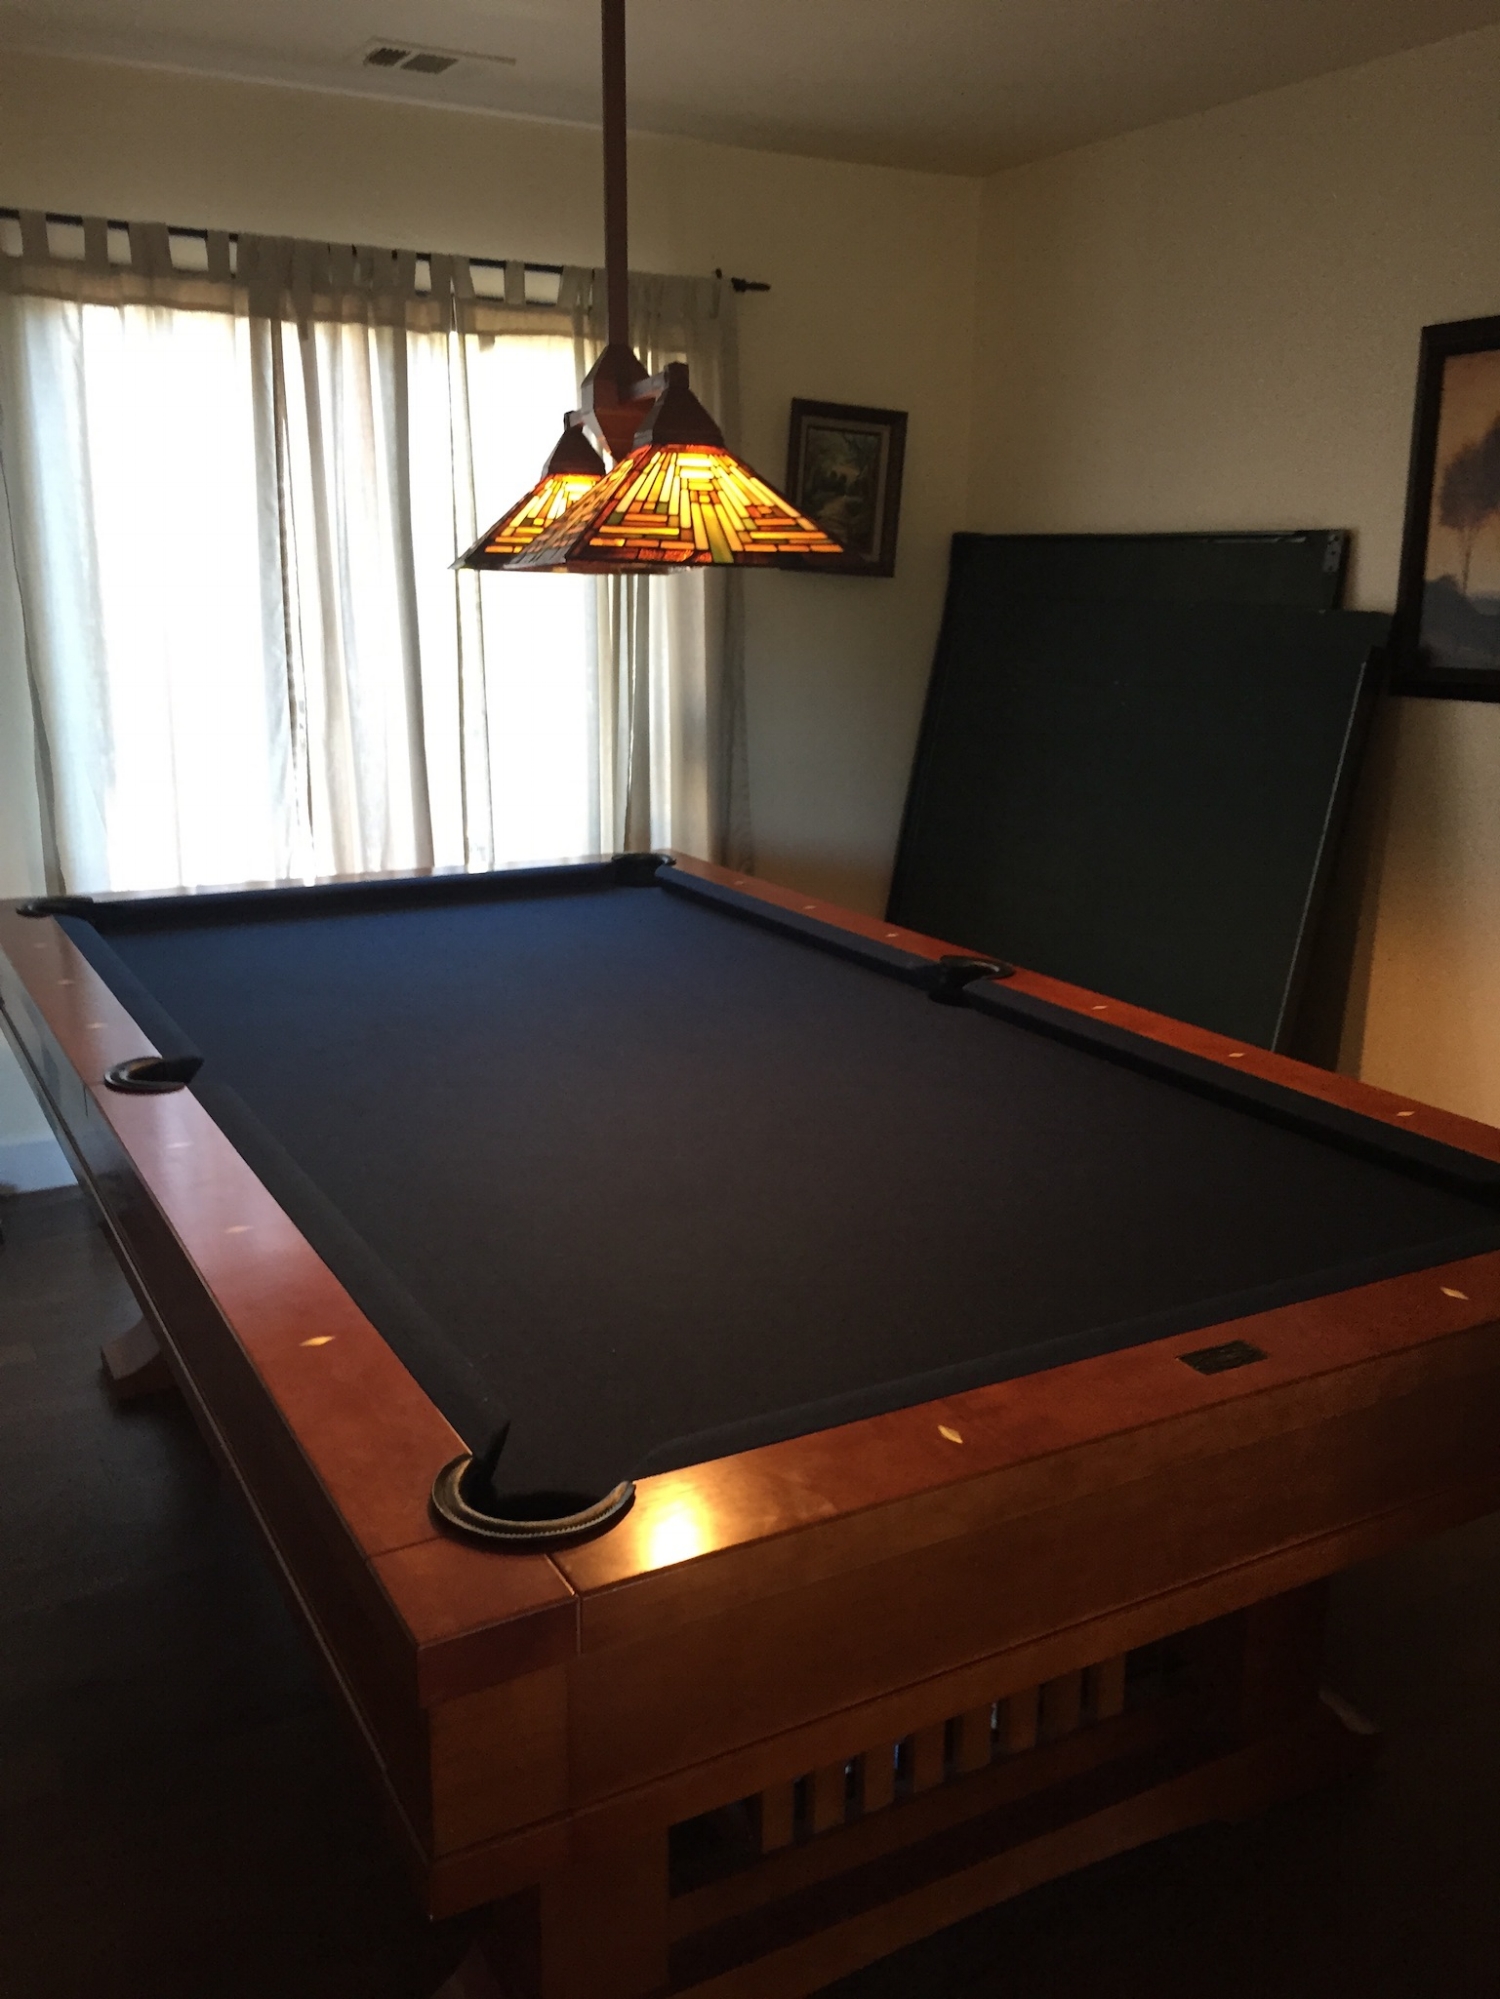 pool and ping pong table, multitudes of board games